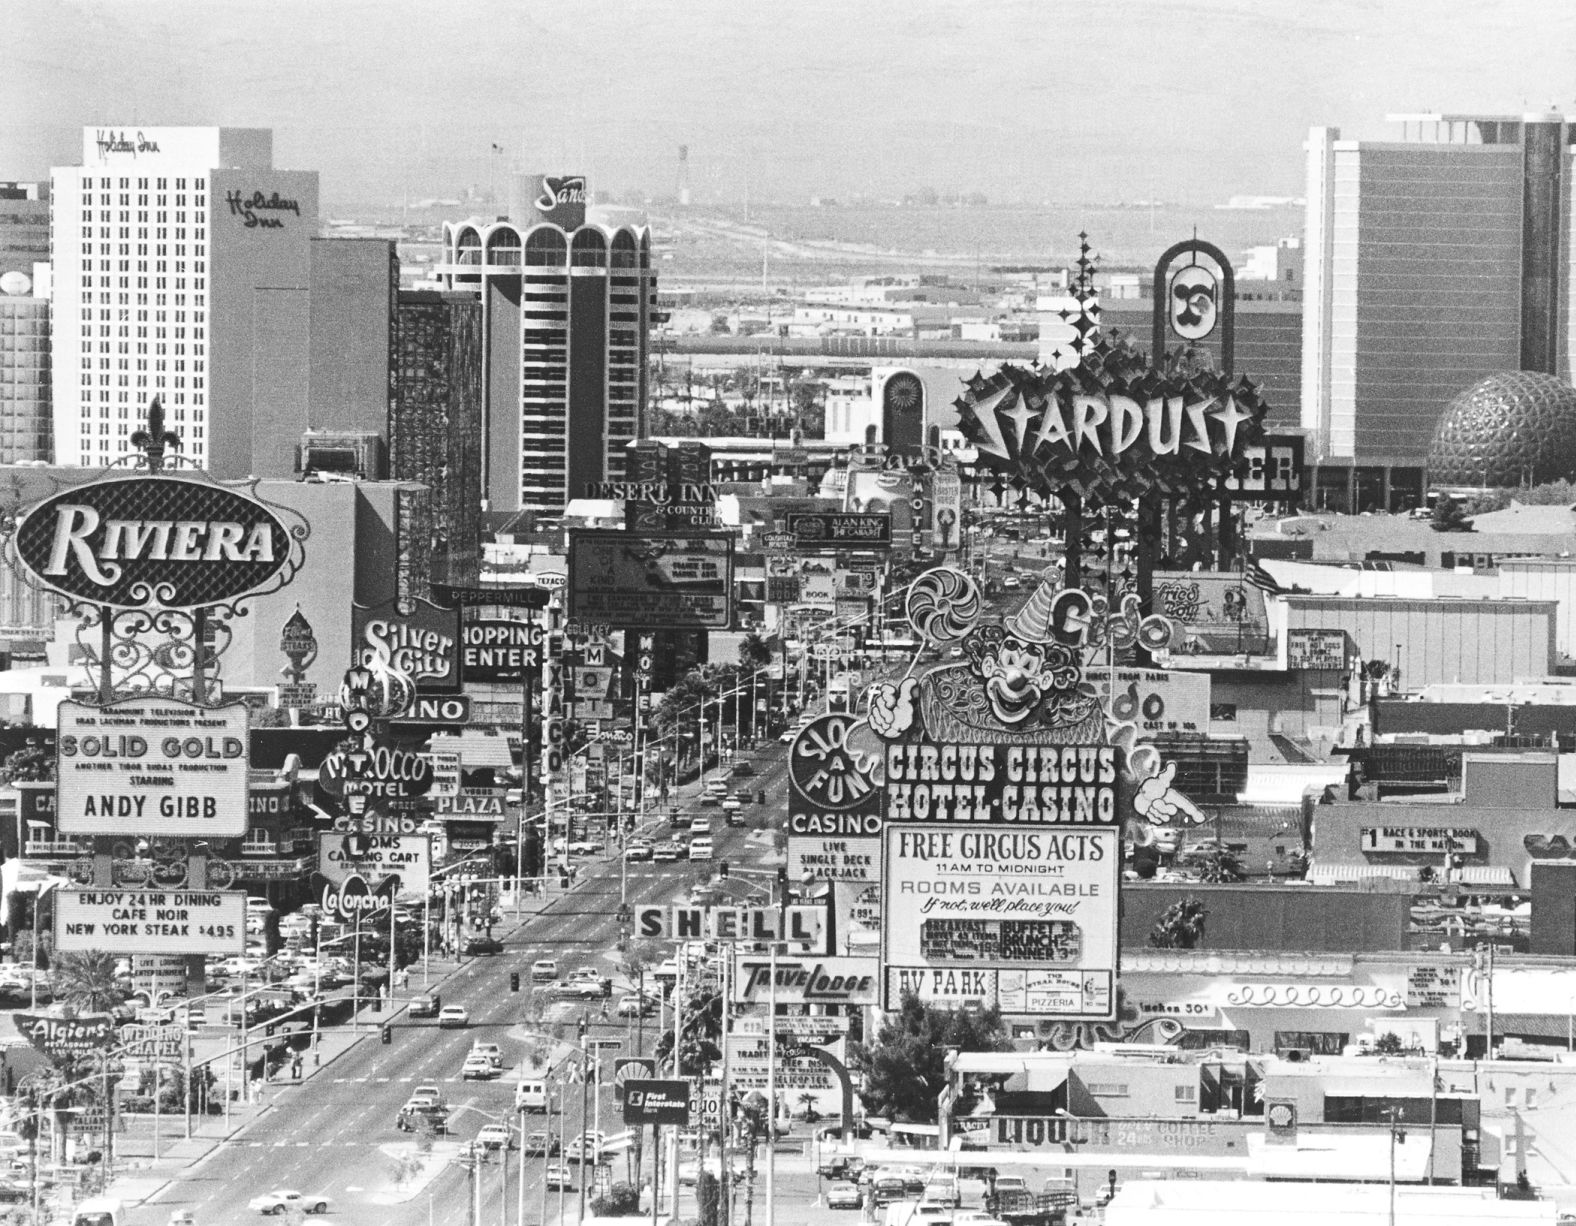 The Las Vegas Strip in 1984. Vegas went through a period of transition in the 1970s and 1980s, taking a more corporate, business-centered approach with the arrival of real estate moguls such as Howard Hughes, Kirk Kerkorian and Steve Wynn.